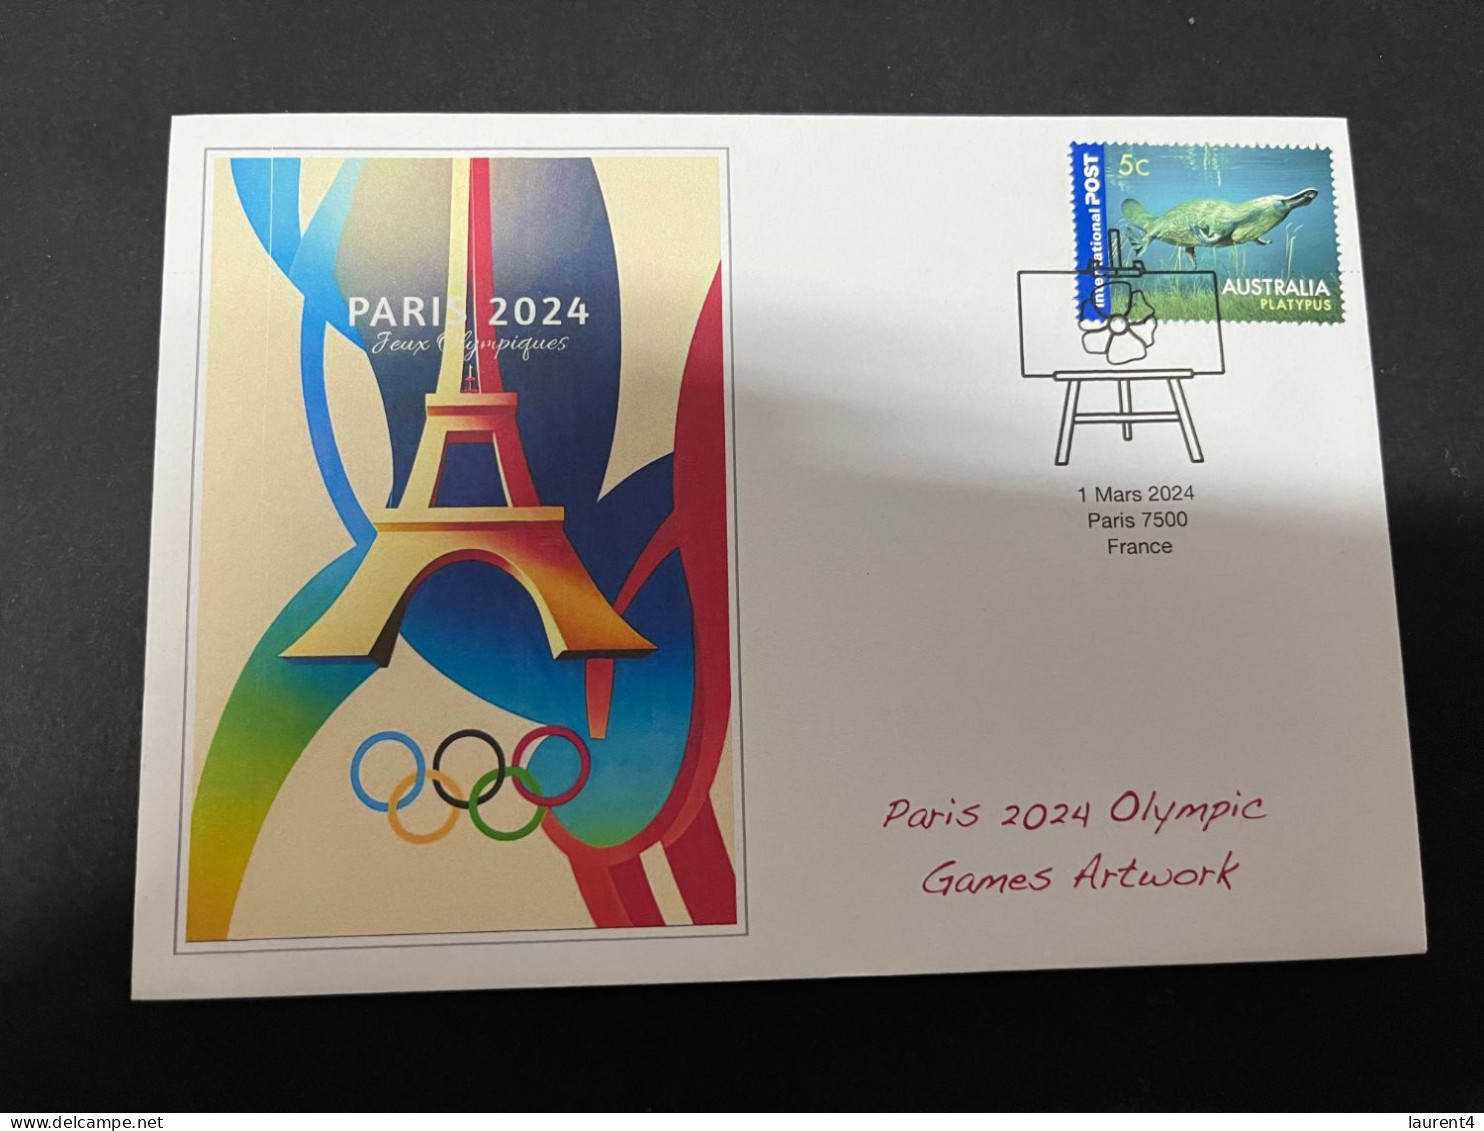 9-3-2024 (2 Y 33) Paris Olympic Games 2024 - 3 (of 12 Covers Series) For The Paris 2024 Olympic Games Artwork - Estate 2024 : Parigi